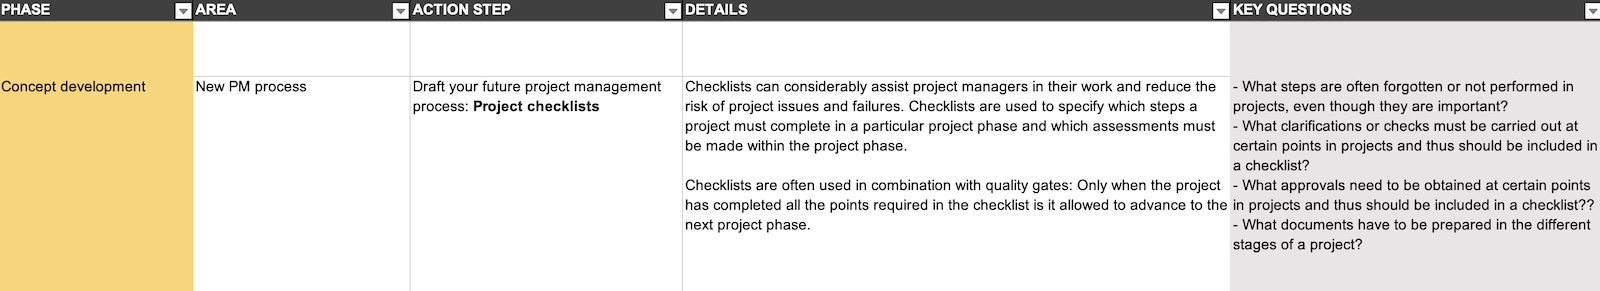 Inside the PMO Launch checklist provides you the key questions you need to ask when standardizing your project execution process.